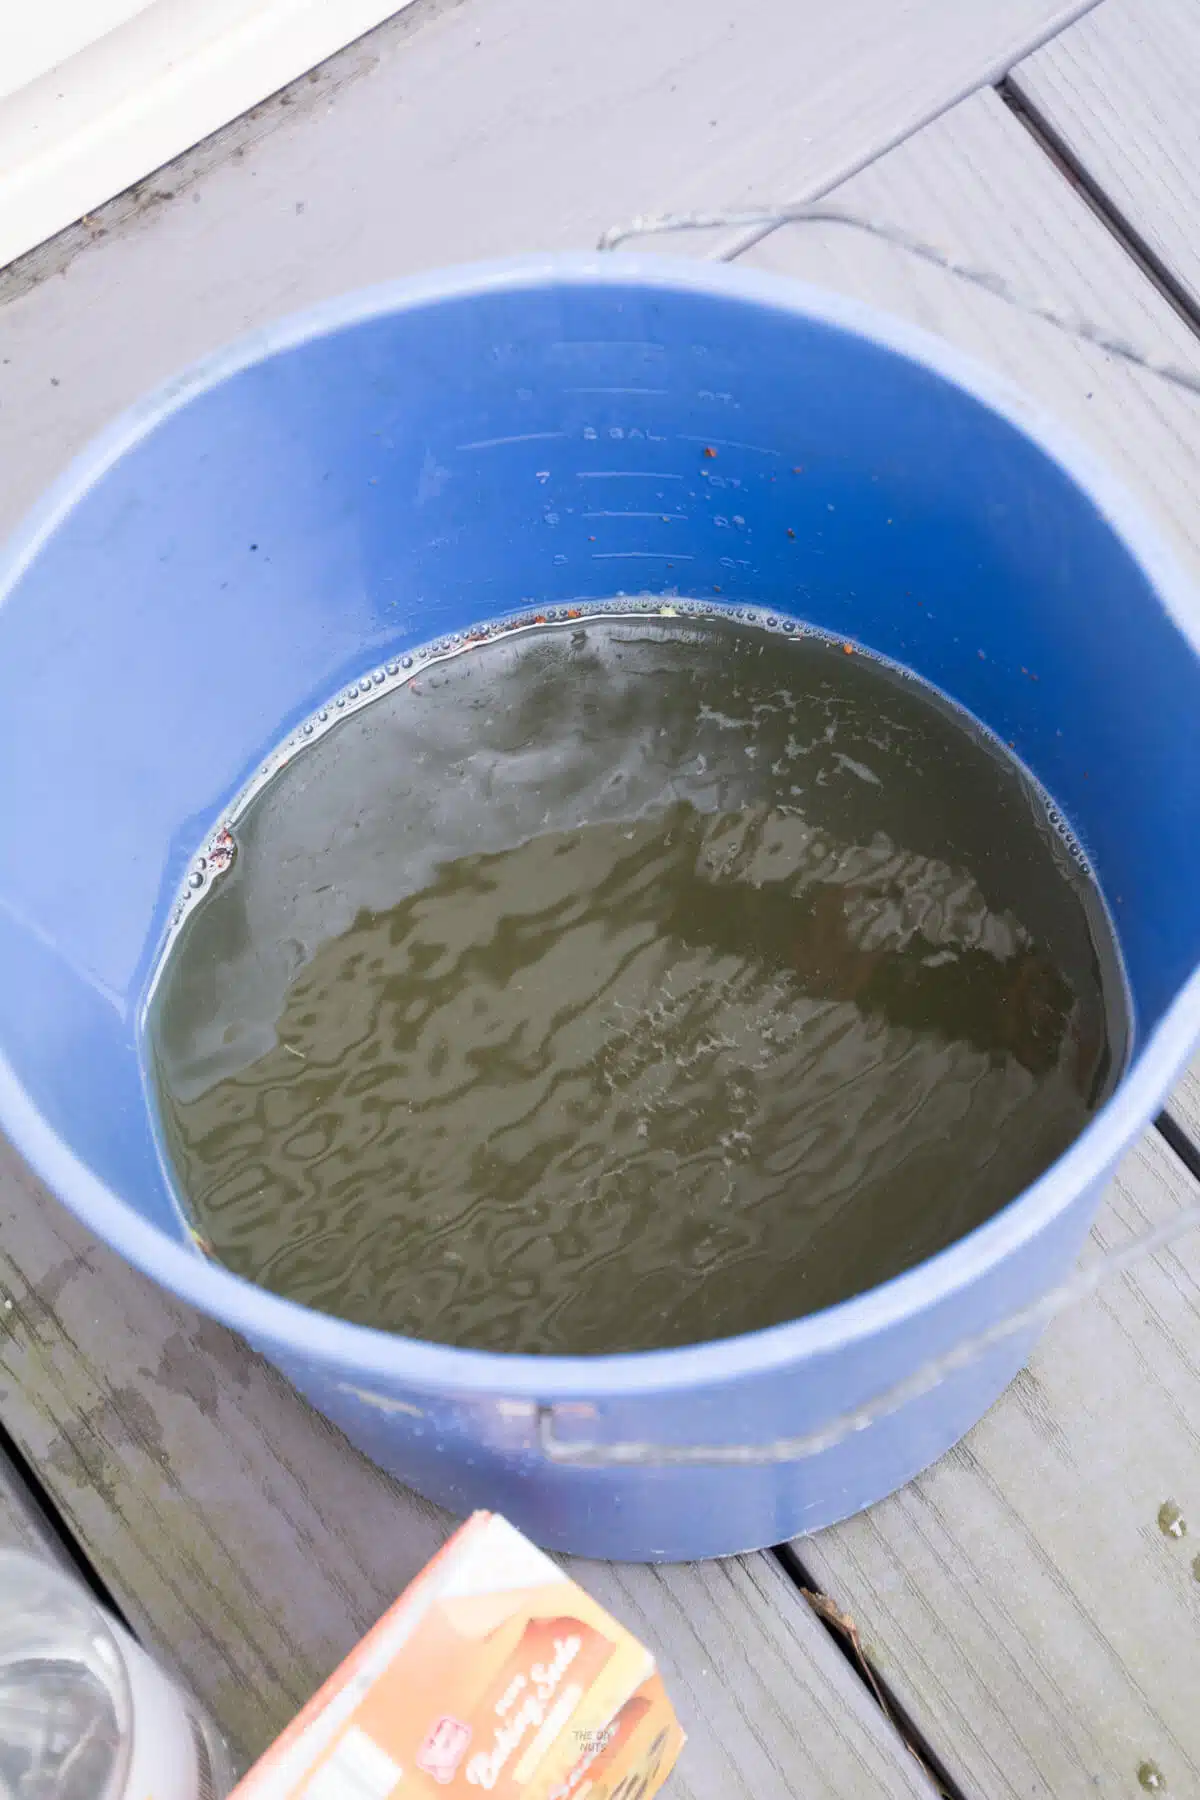 bucket filled with mildew after DIY cleaning used.